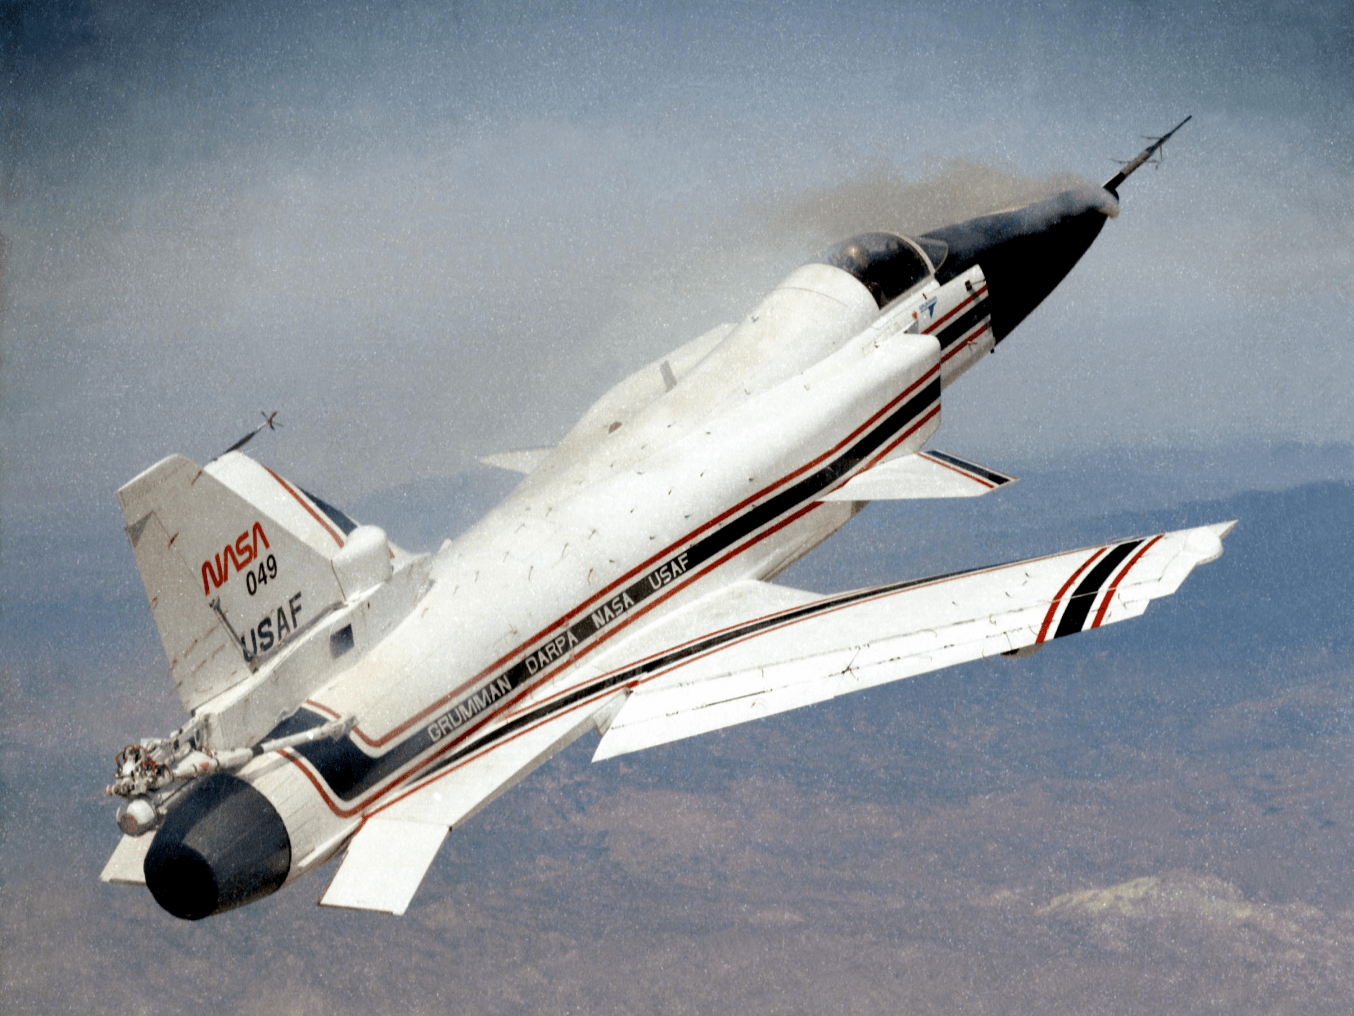 The smoke coming from the nose of the X-29 is demonstrating forebody vortex flow at a high angle of attack.